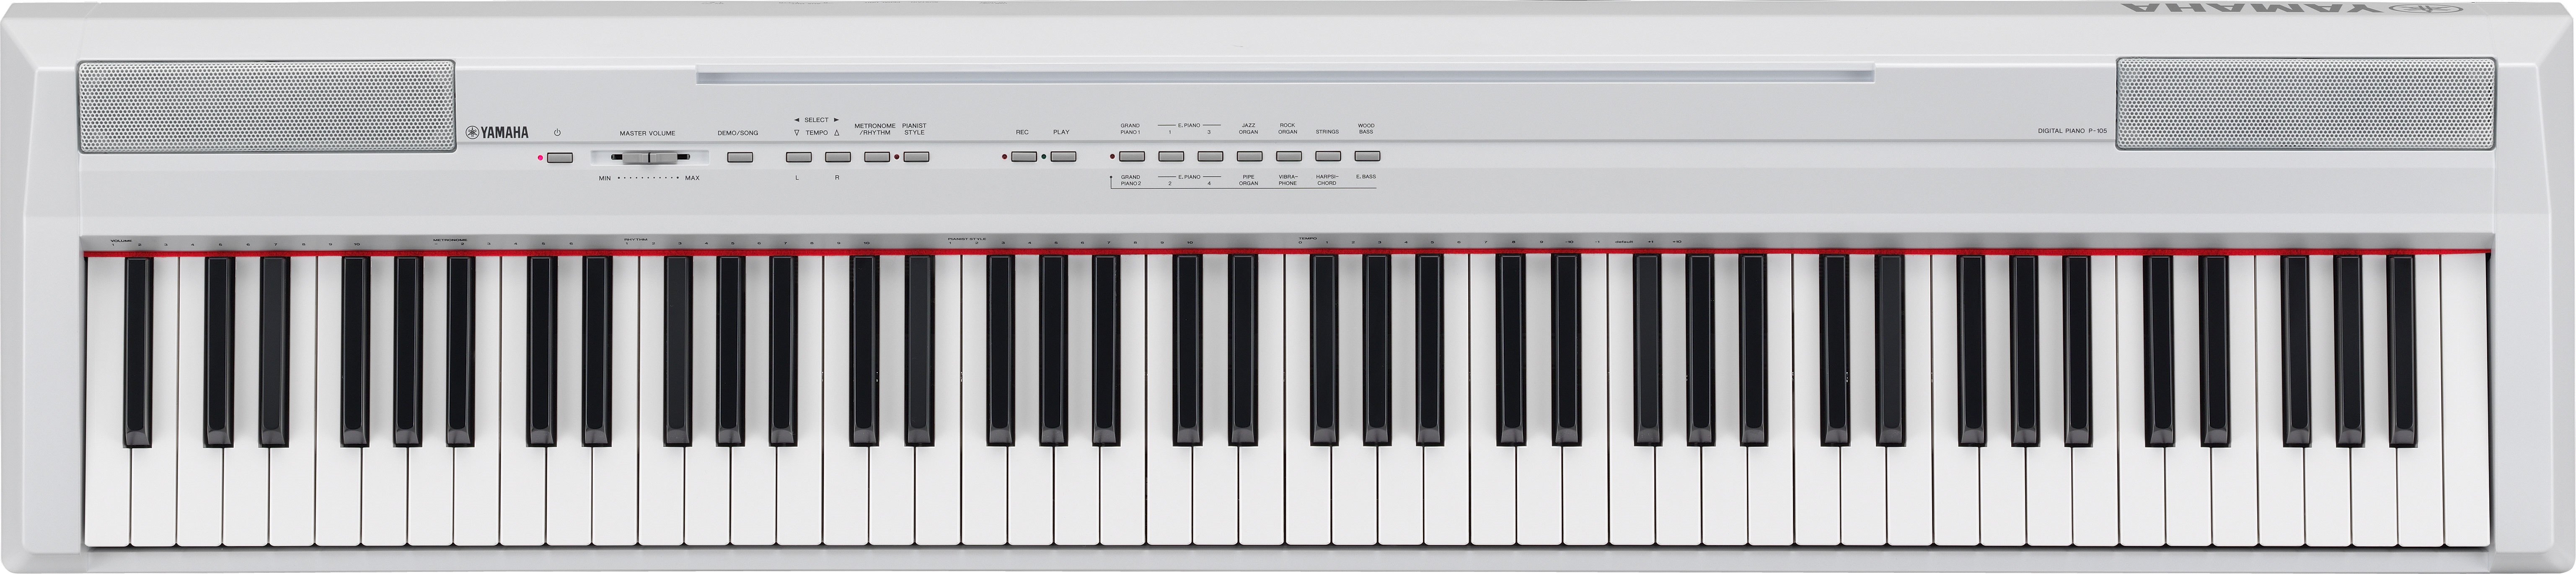 P-105 - Overview - Portables - Pianos - Musical Instruments 